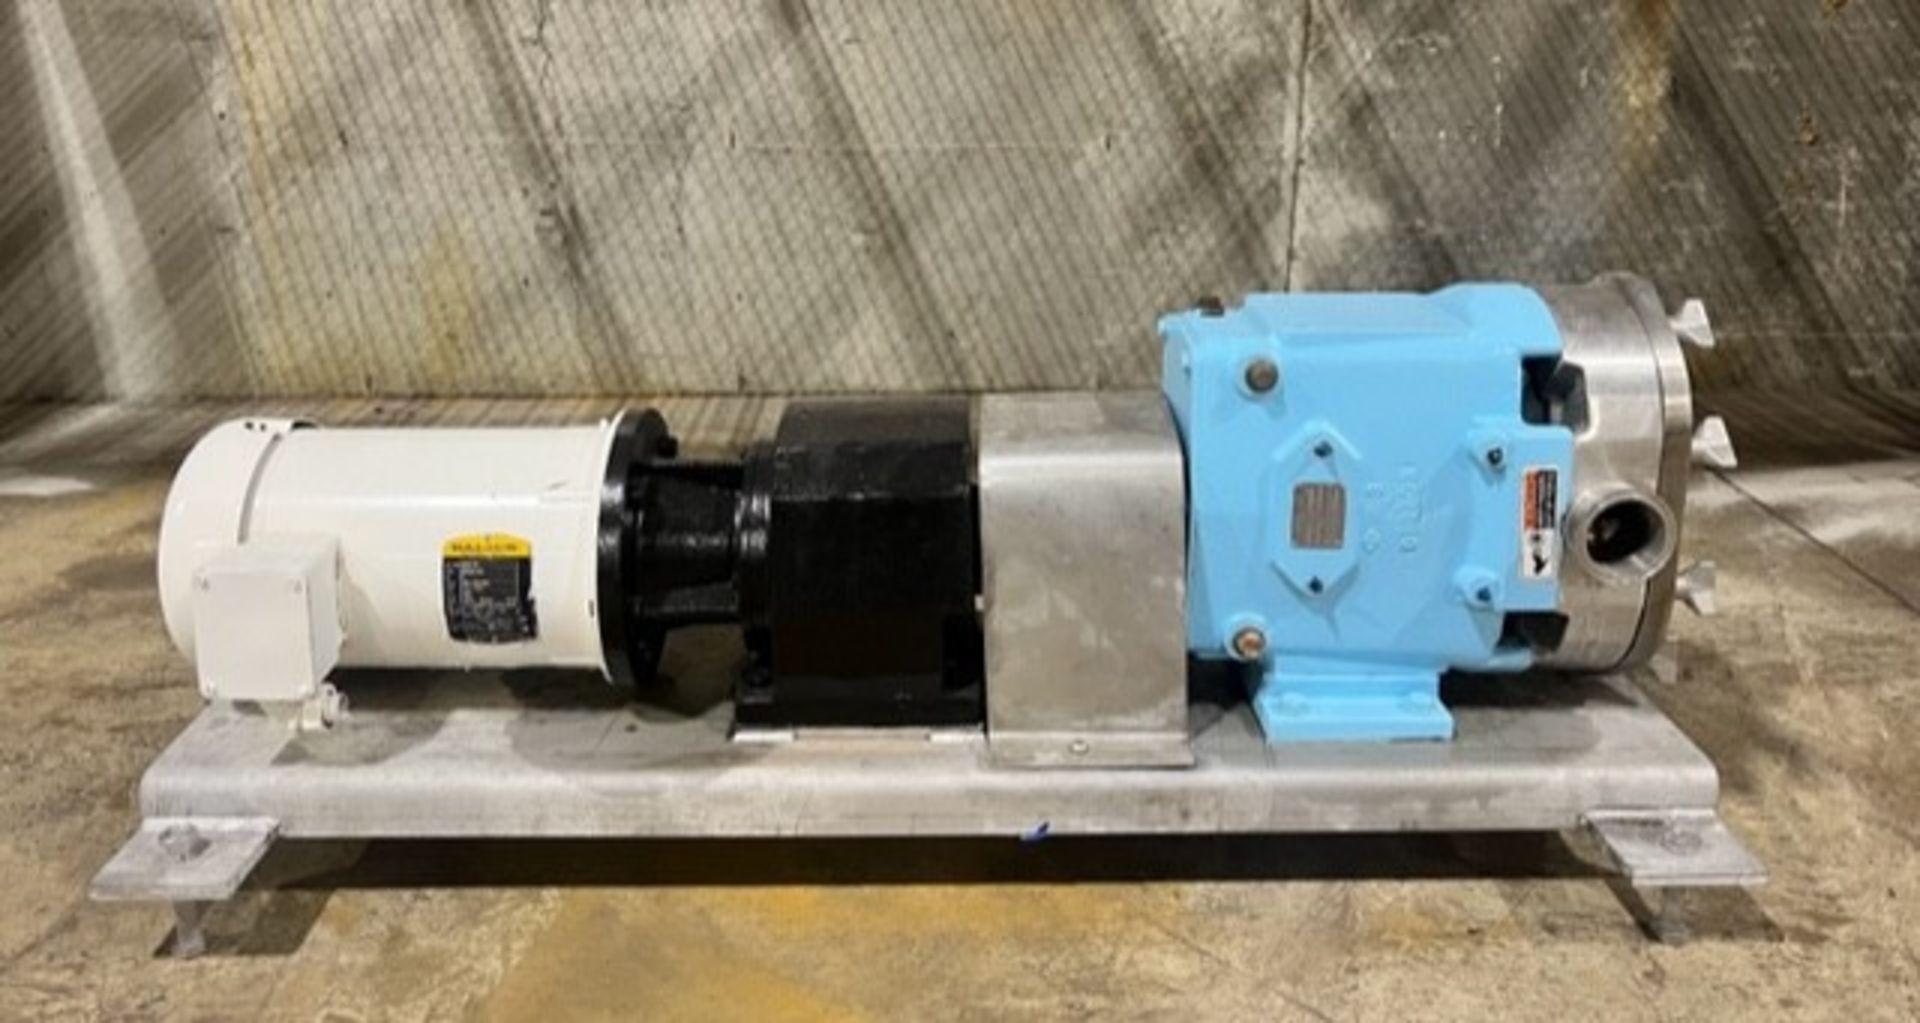 Waukesha Positive Pump, Model 060, S/N 318403 02 with 2.5" Inlet/Outlet, Stainless Rotors, Powered